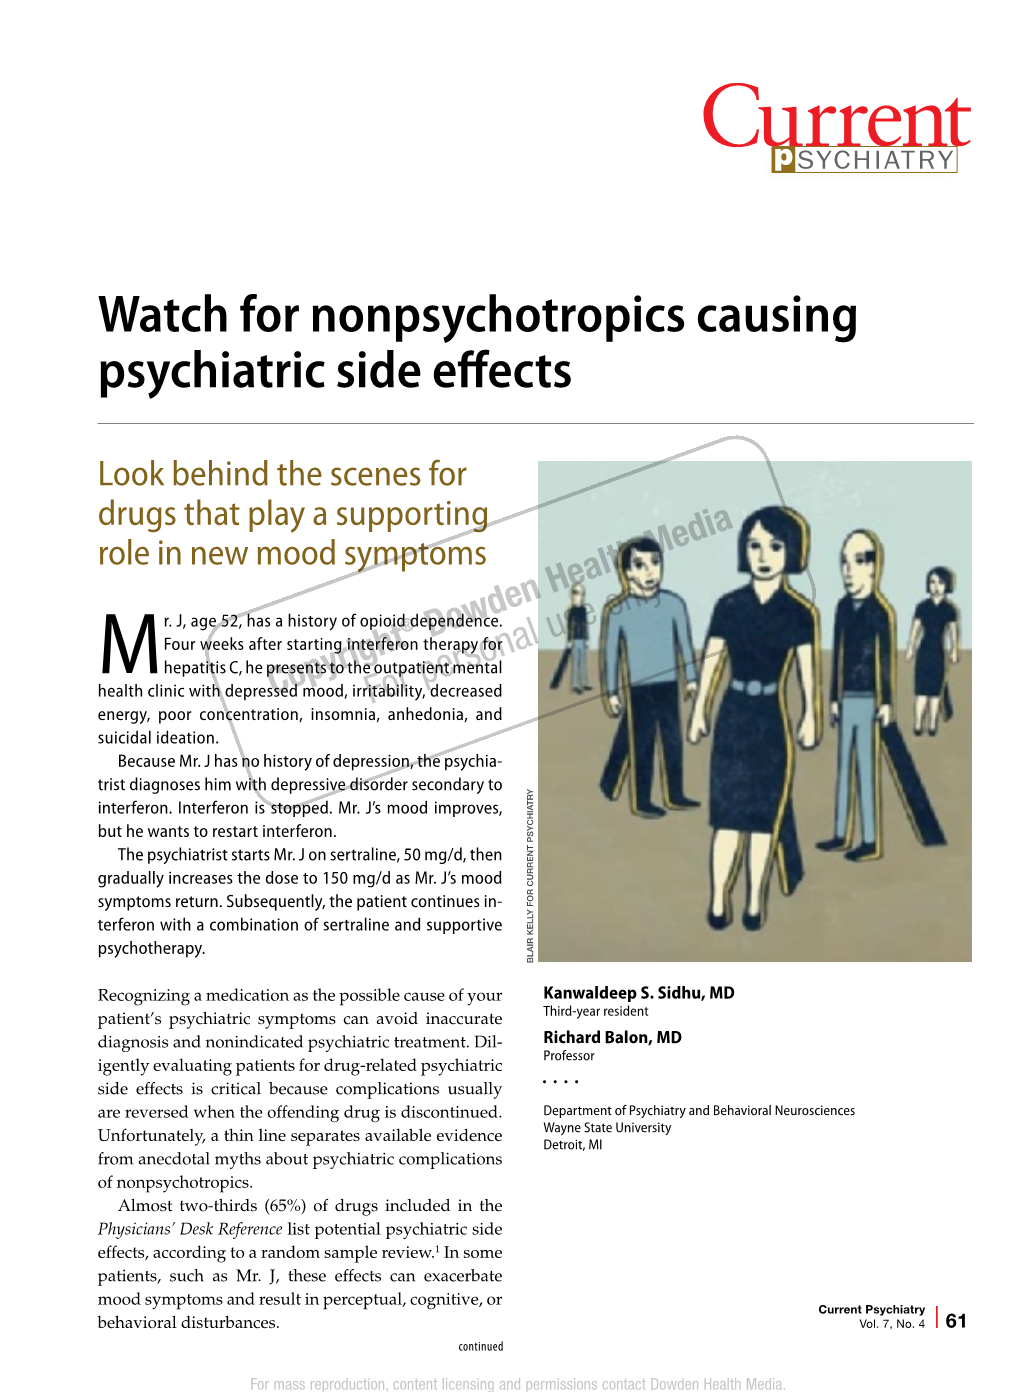 Watch for Nonpsychotropics Causing Psychiatric Side Effects